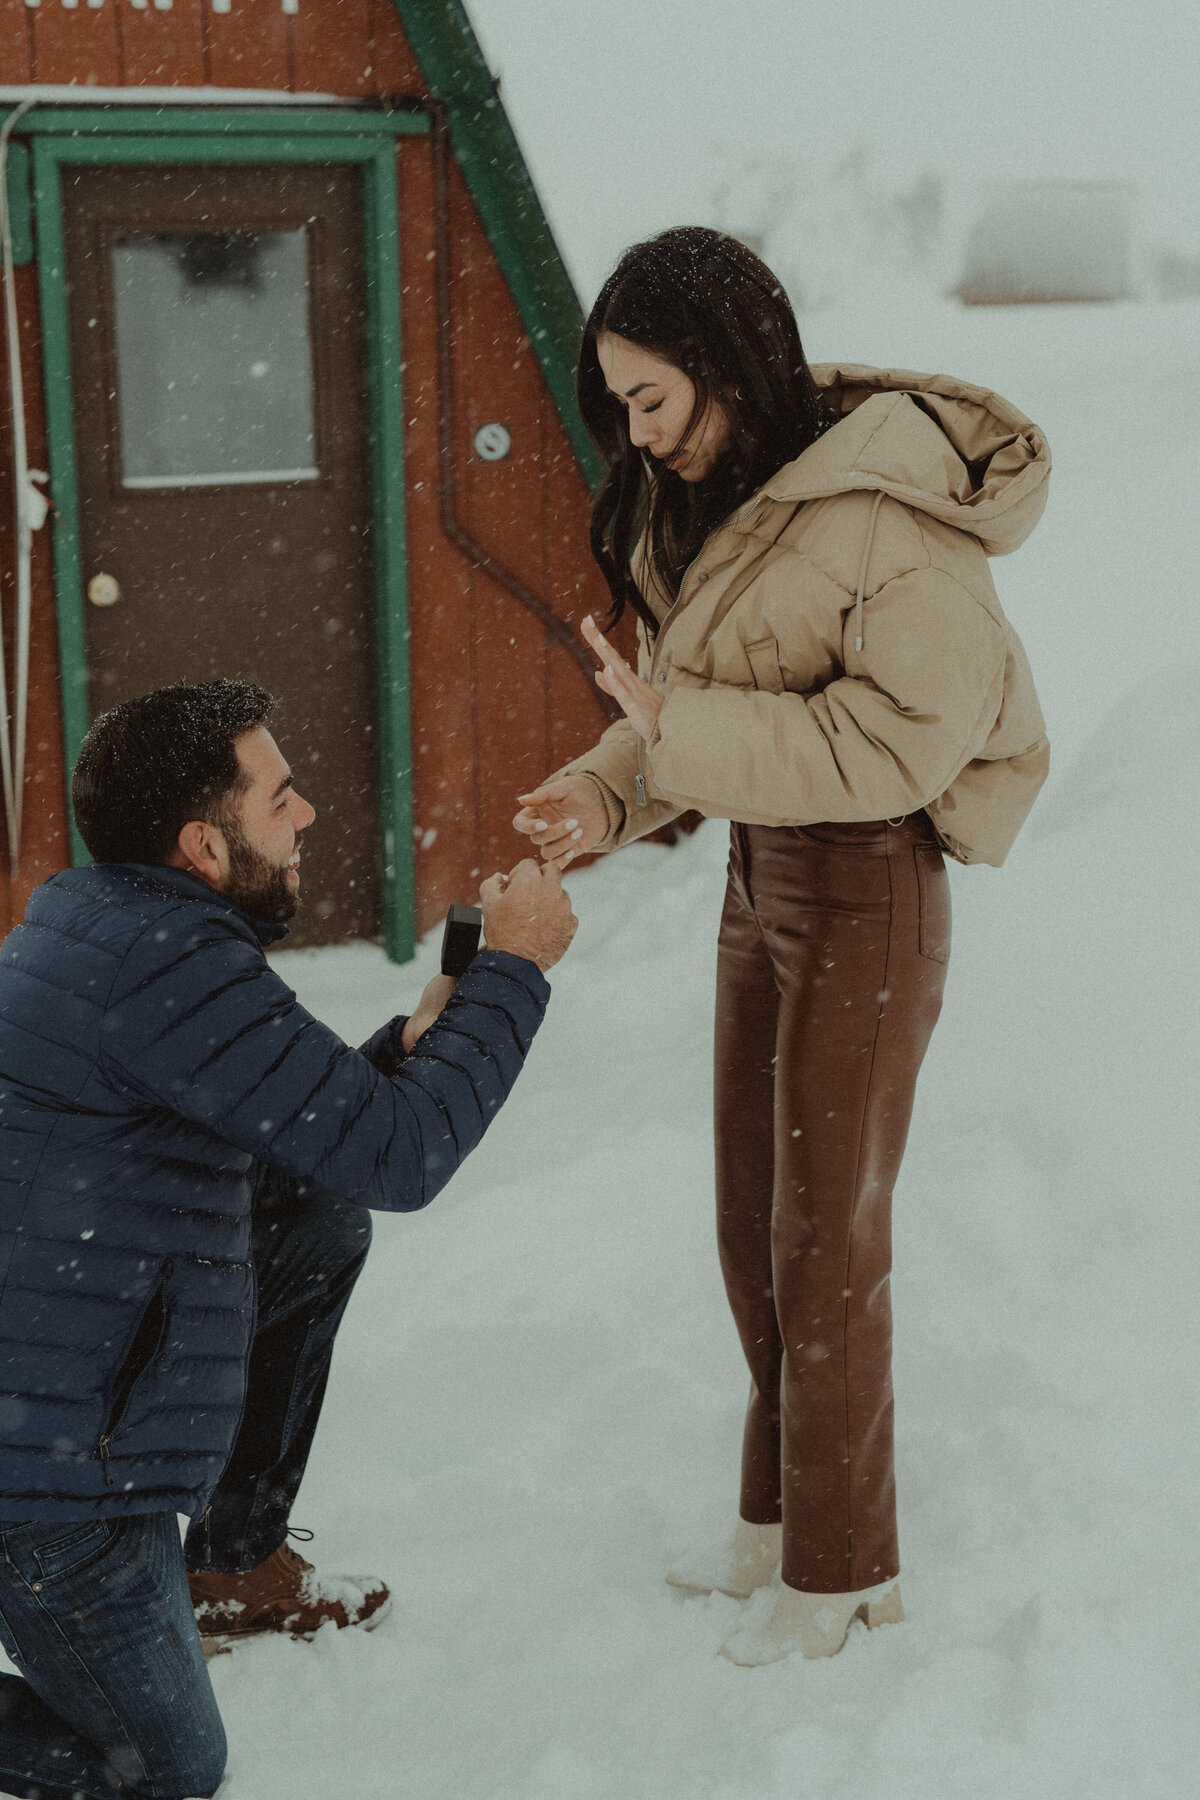 proposal photos during the winter in alaska